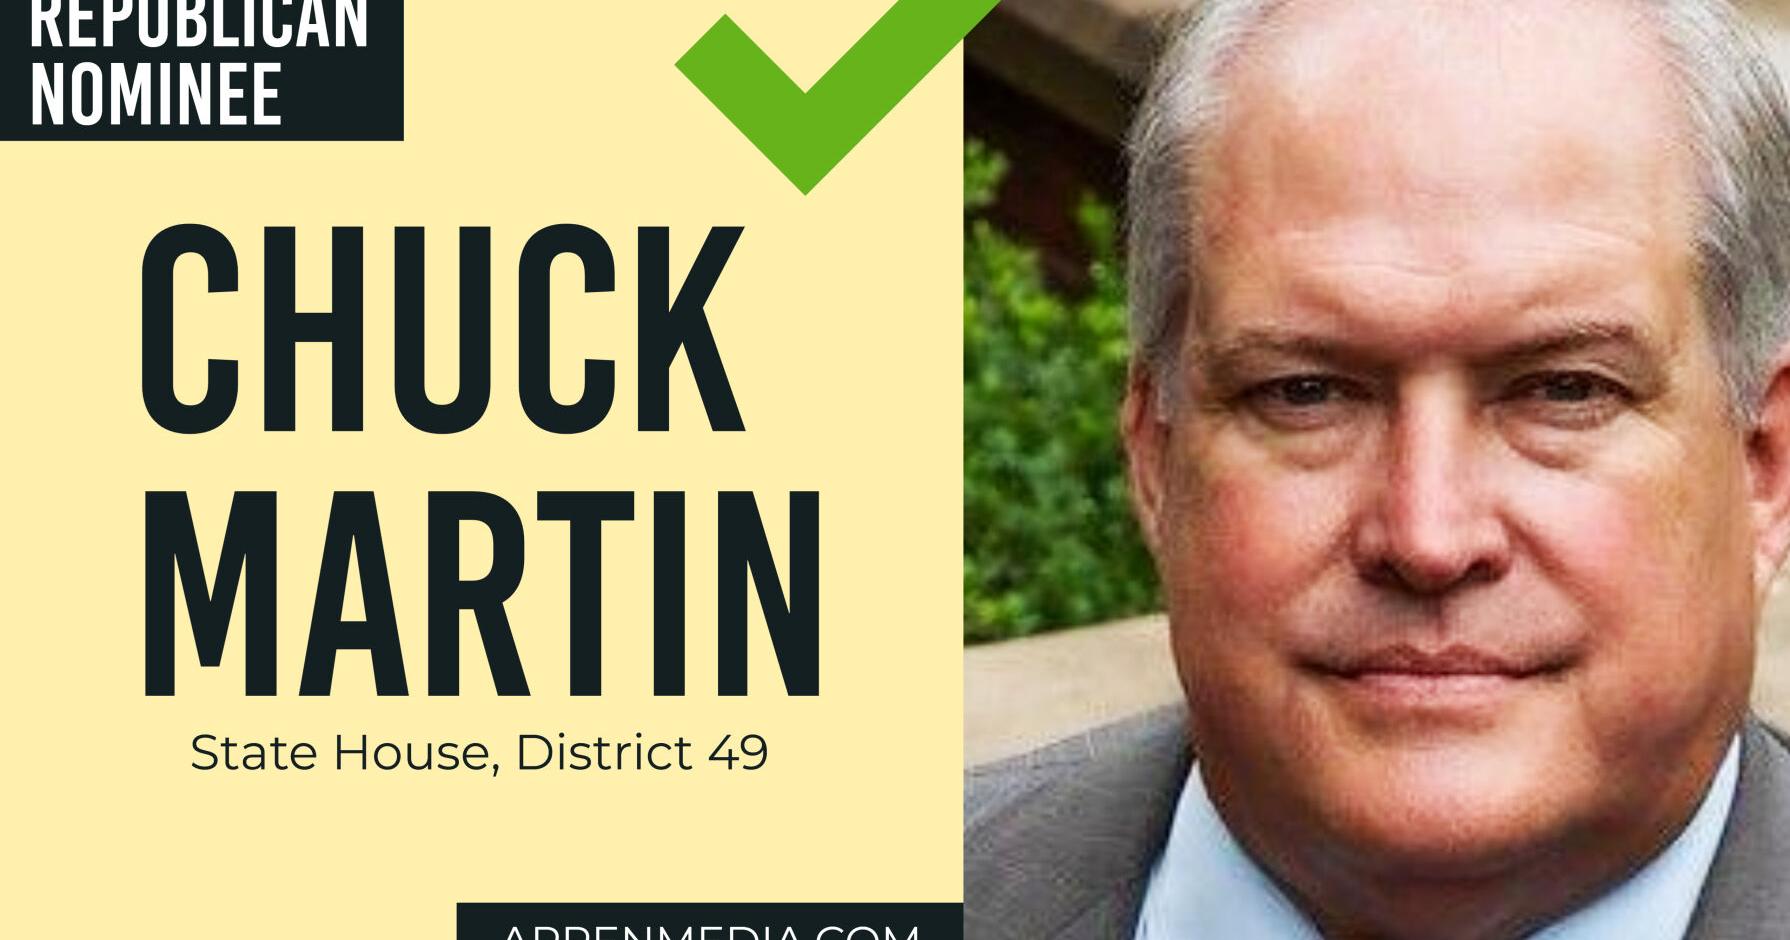 Chuck Martin retains Republican nomination for State House District 49